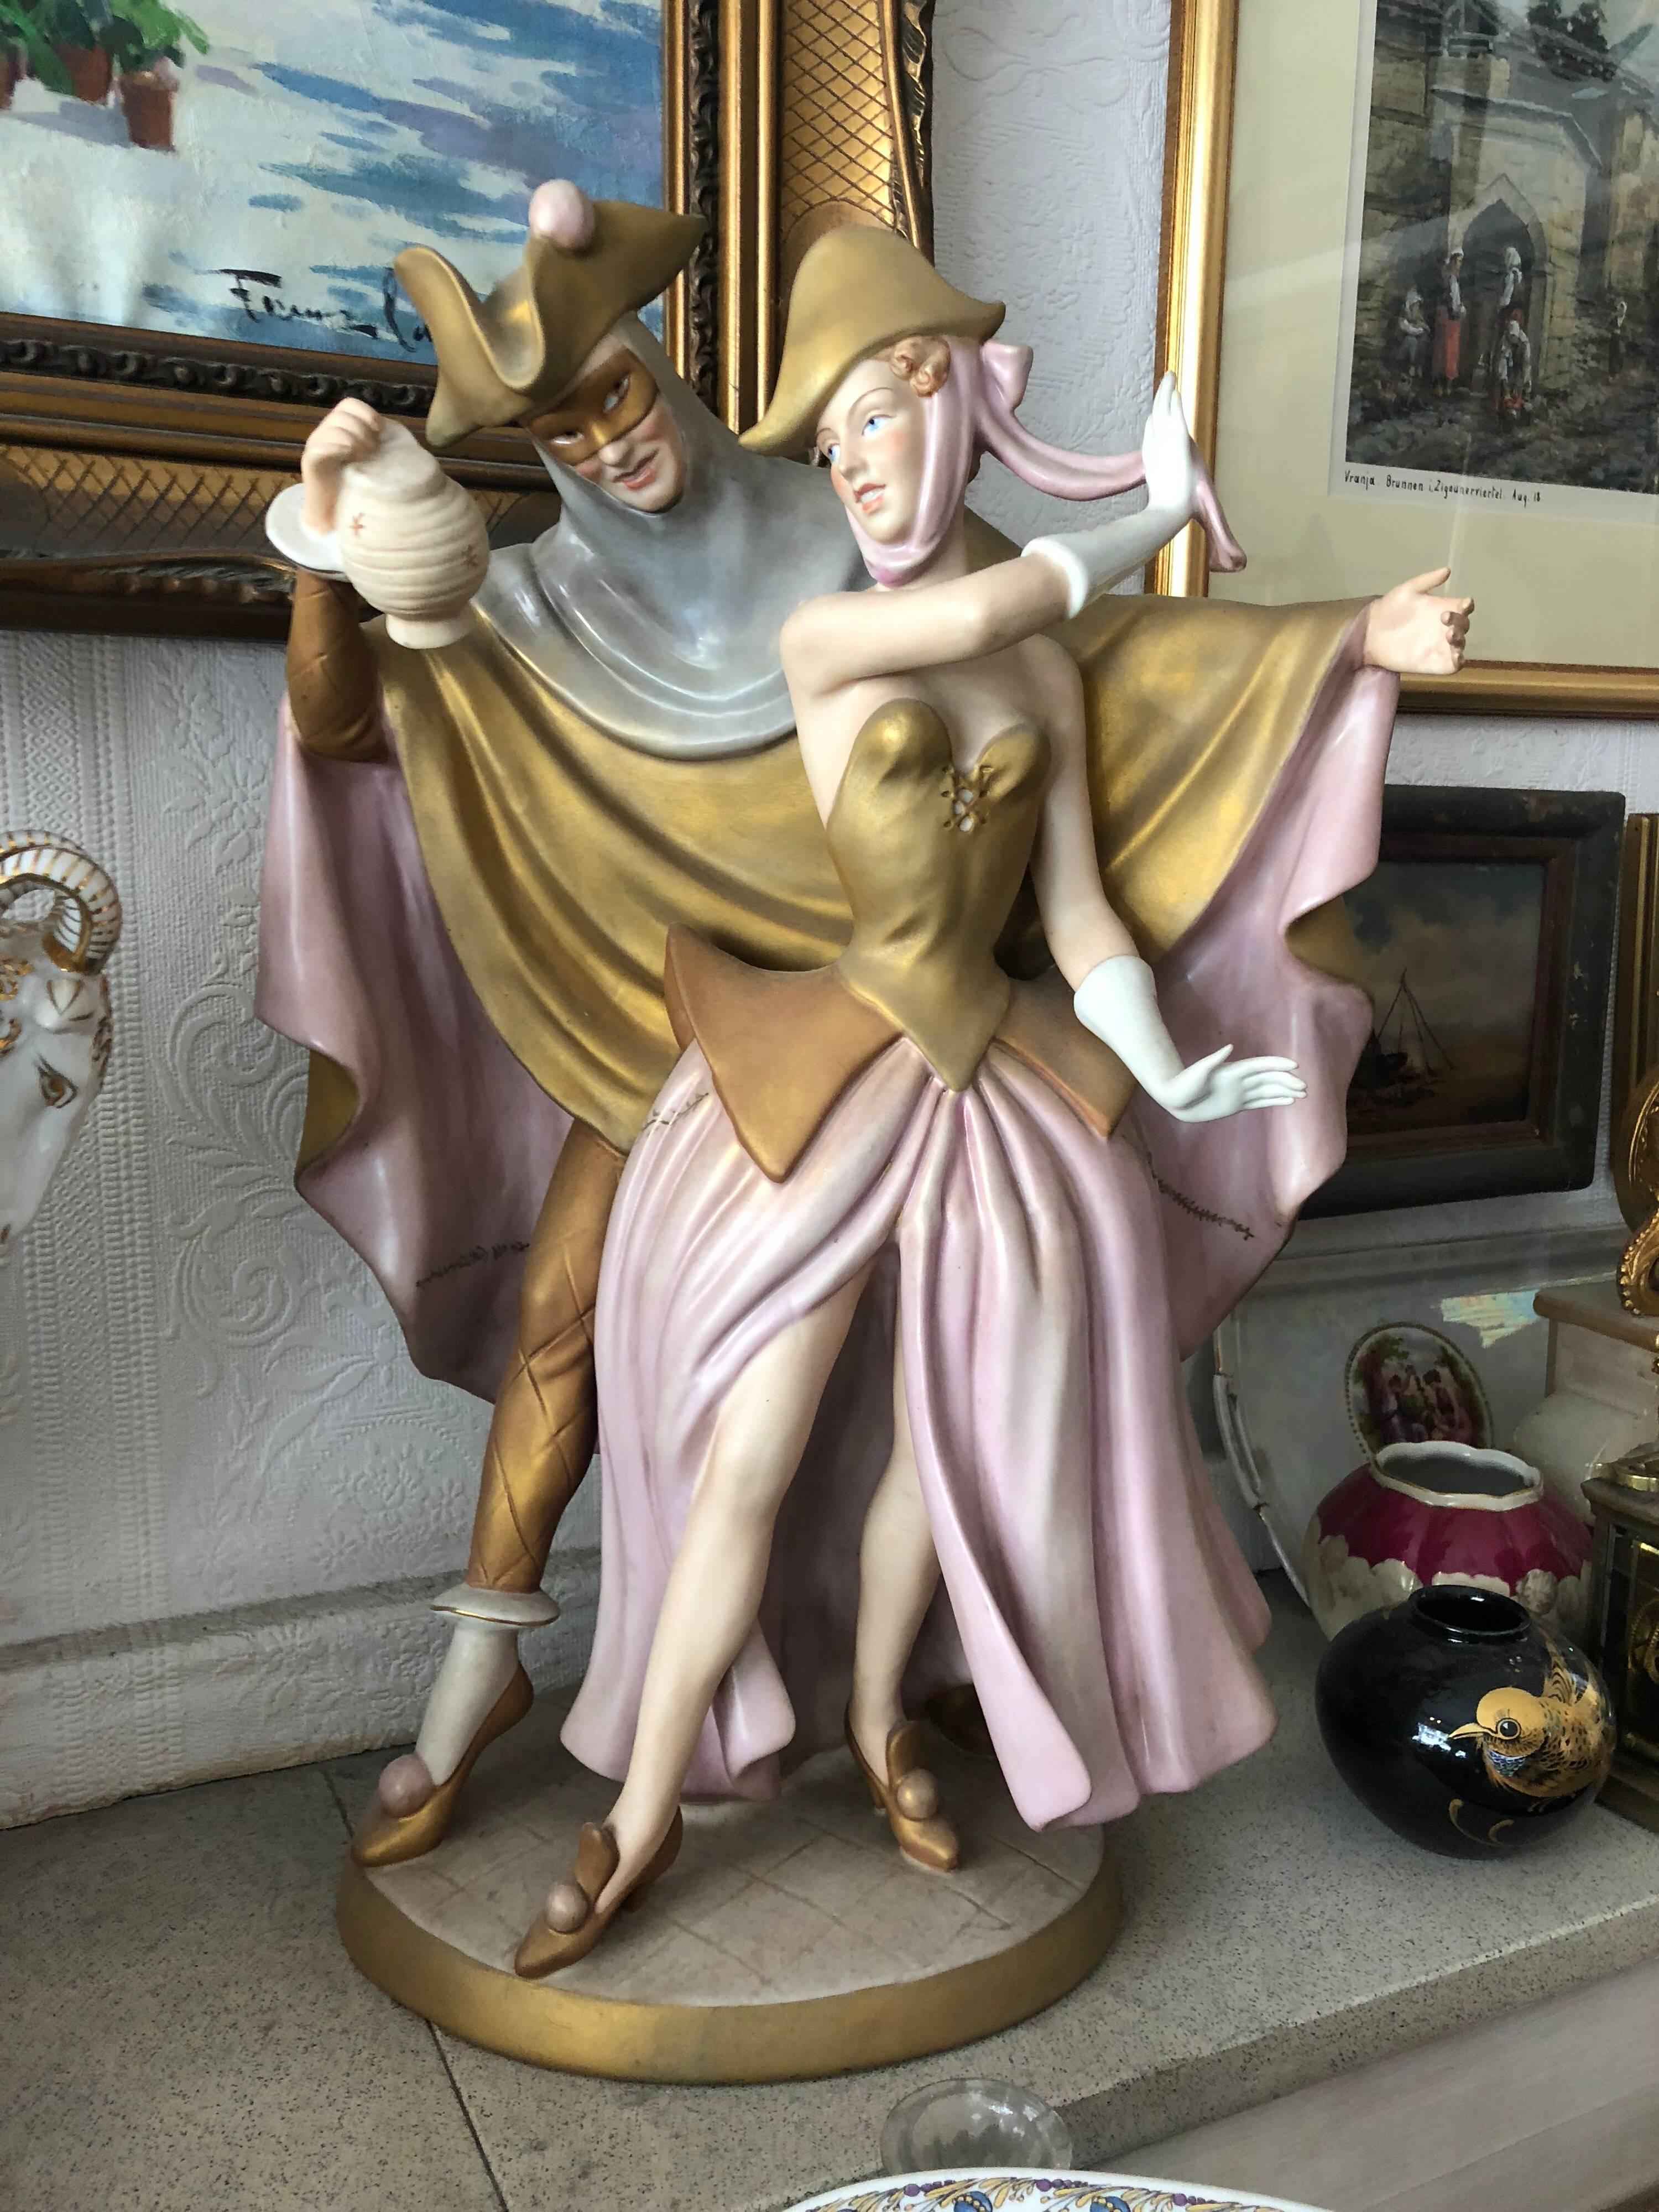 Lovely rare 50 cm height Royal Dux dancing couple figure 
Limited Edition 

Duxer Porzellanmanufaktur, or Dux Porcelain Manufactory, was started in 1860 by Eduard Eichler in what was then Duchov, Bohemia. The high quality pottery and porcelain